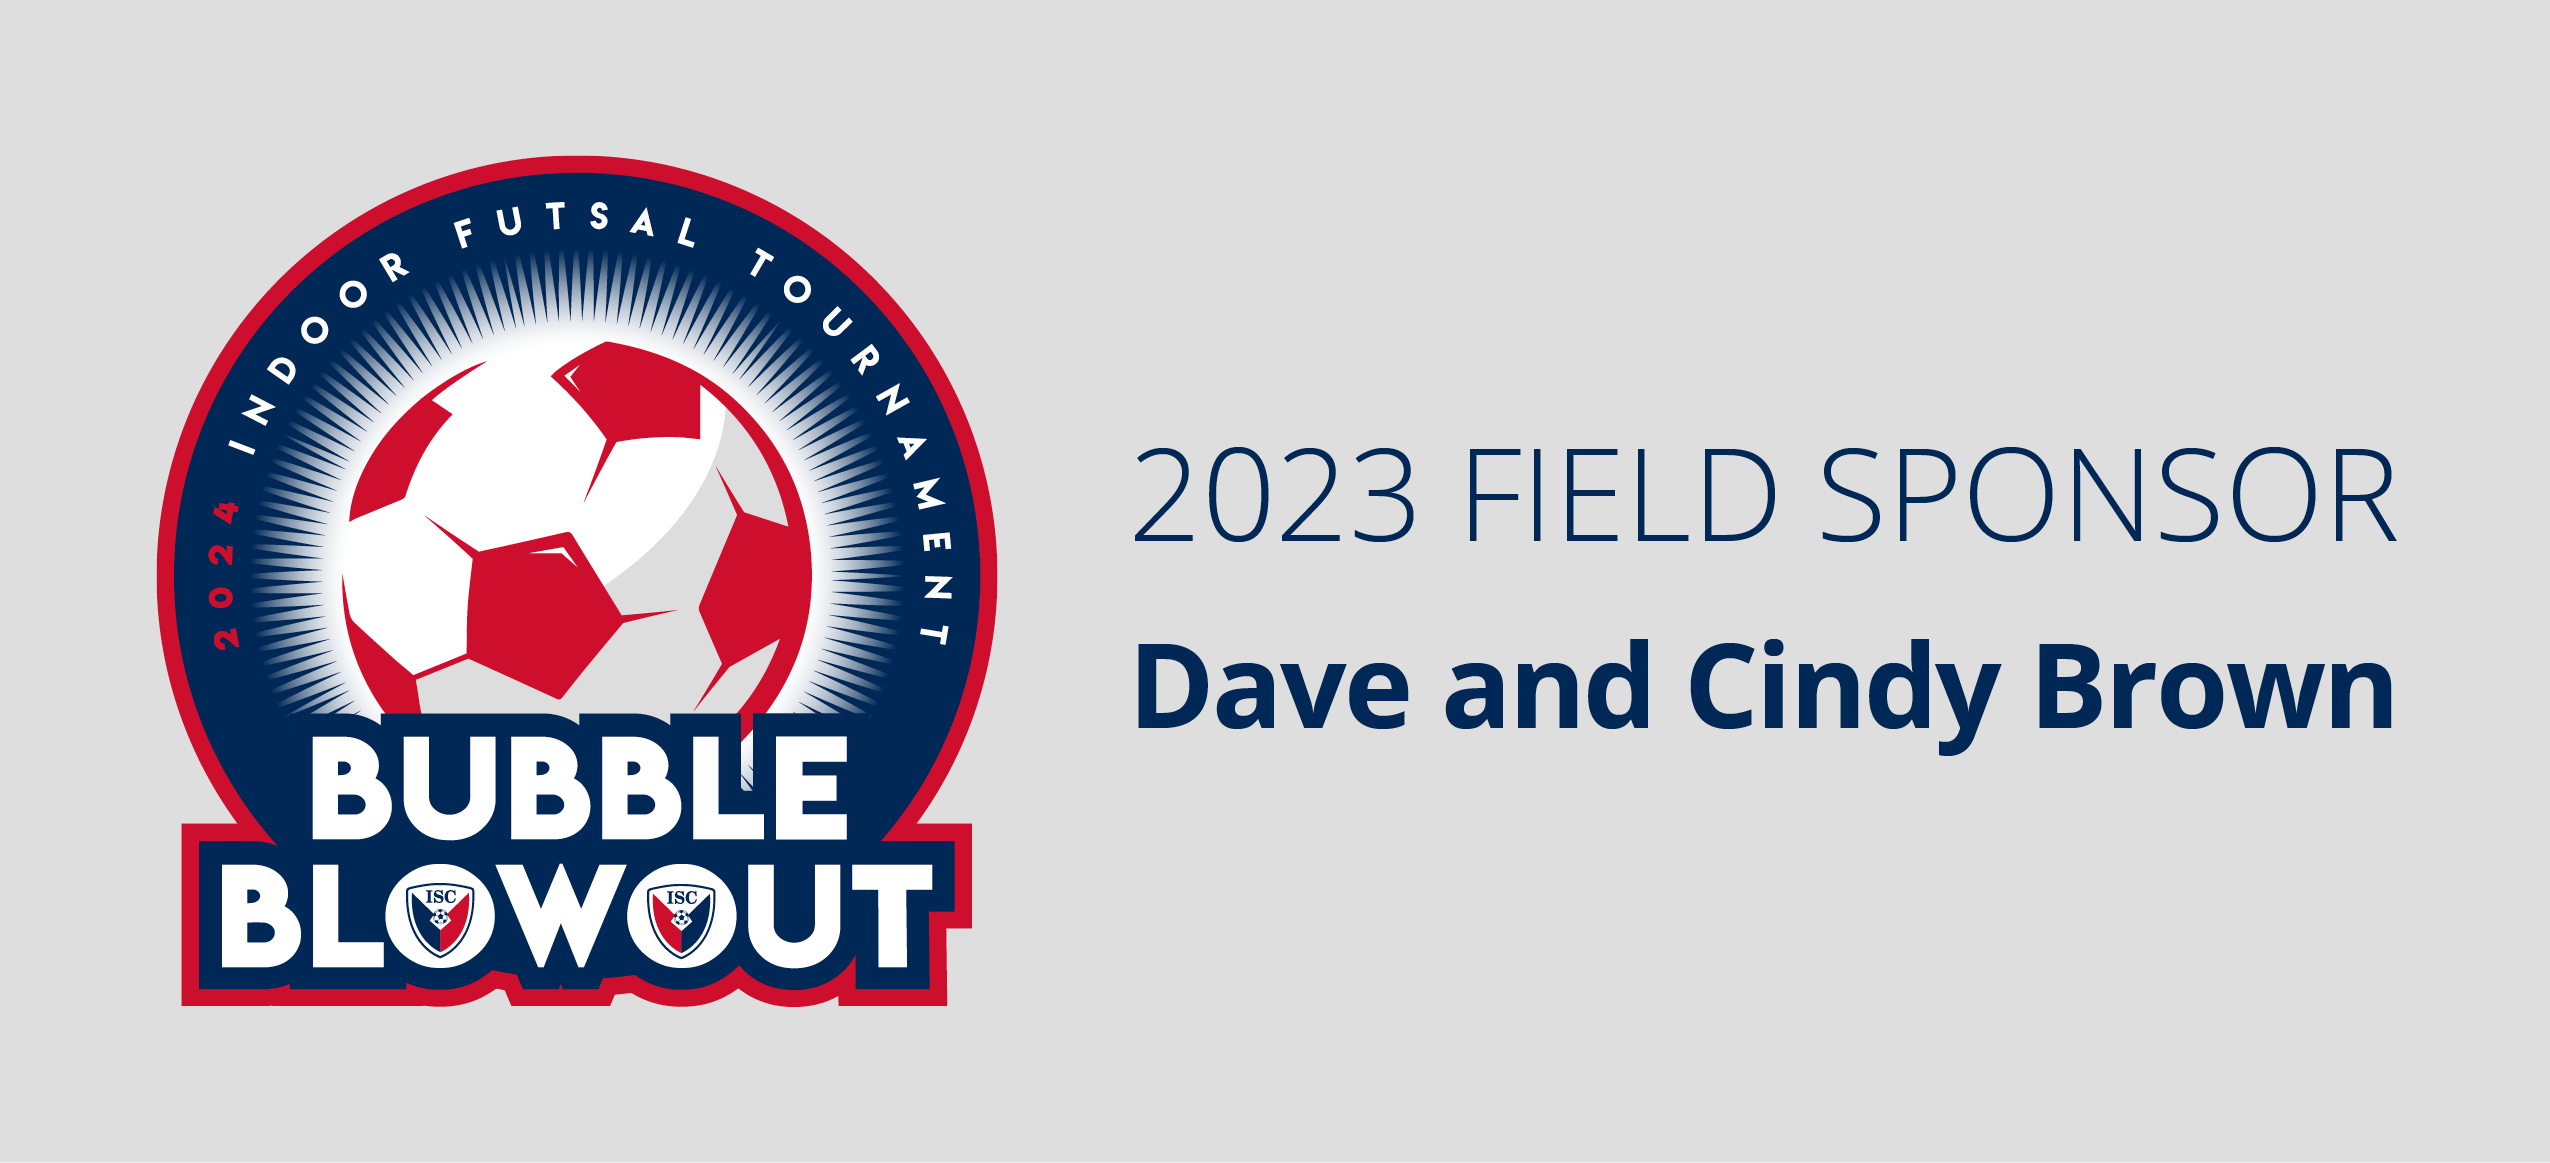 Iowa Soccer Club | Bubble Blowout Field Sponsors | Dave and Cindy Brown